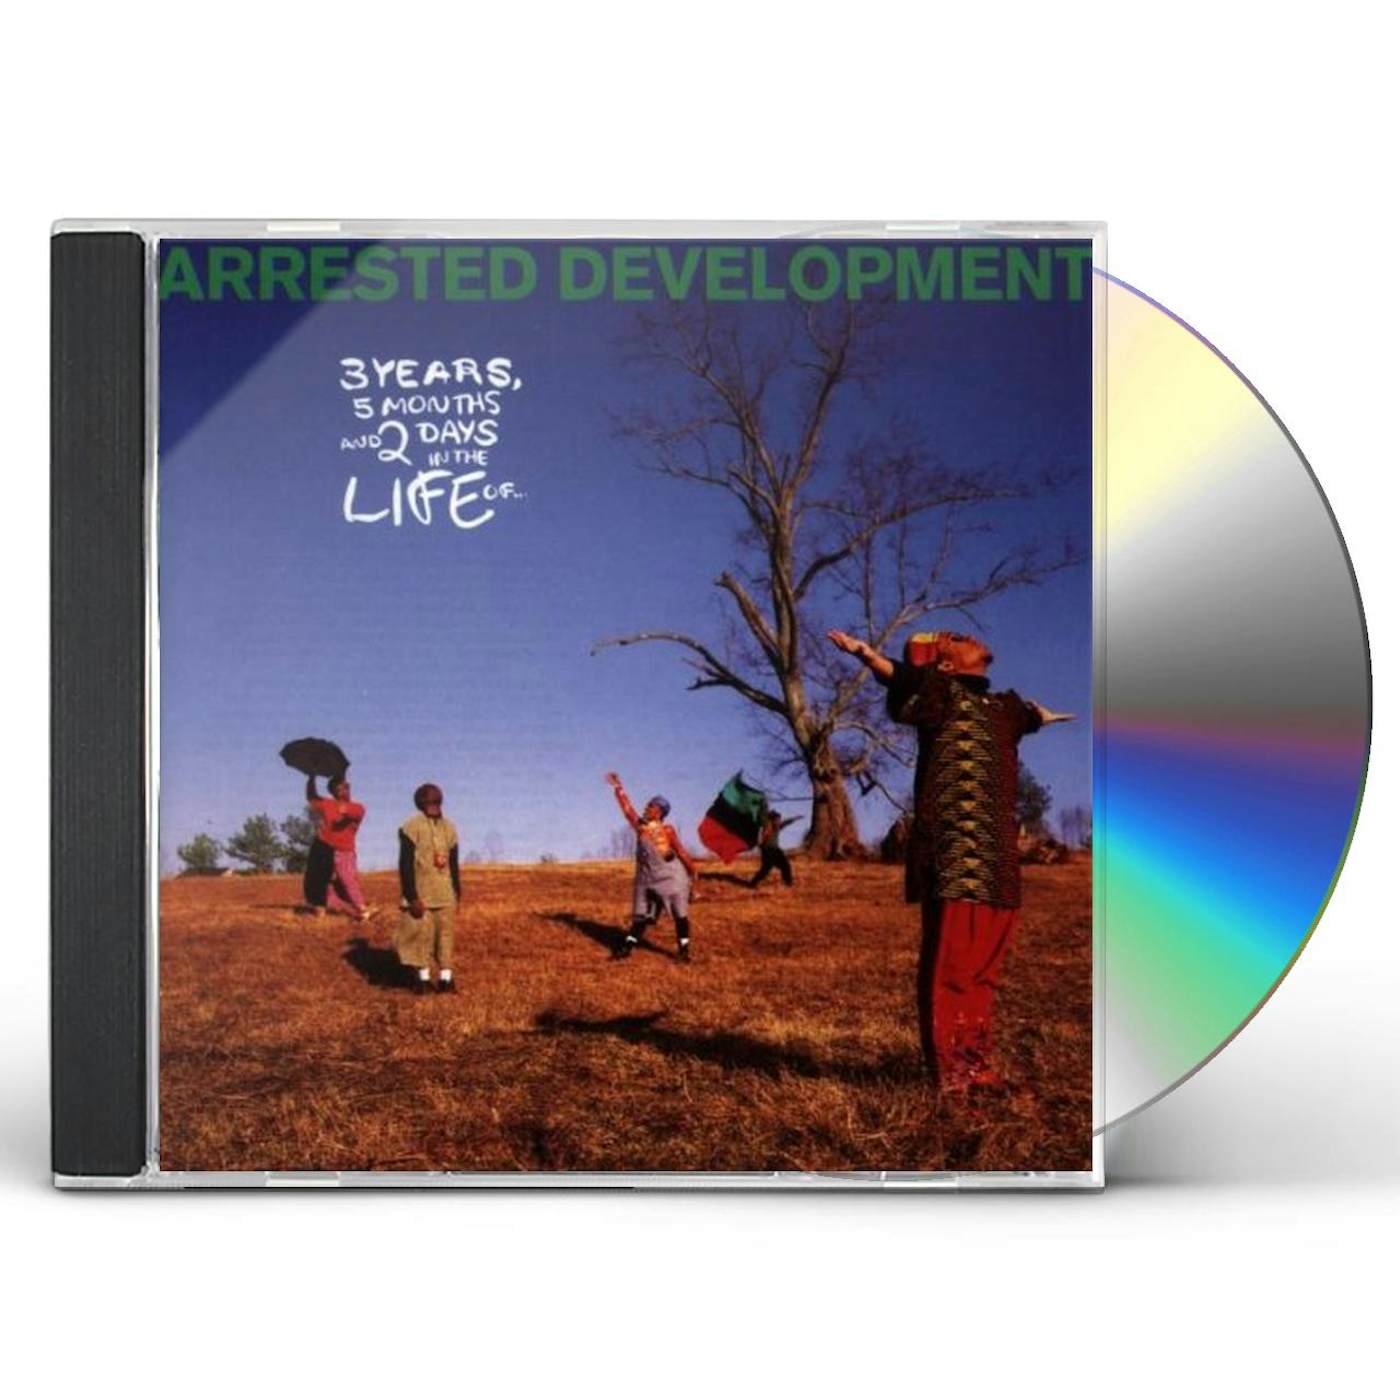 Arrested Development 3 YEARS 5 MONTHS & 2 DAYS IN THE LIFE CD